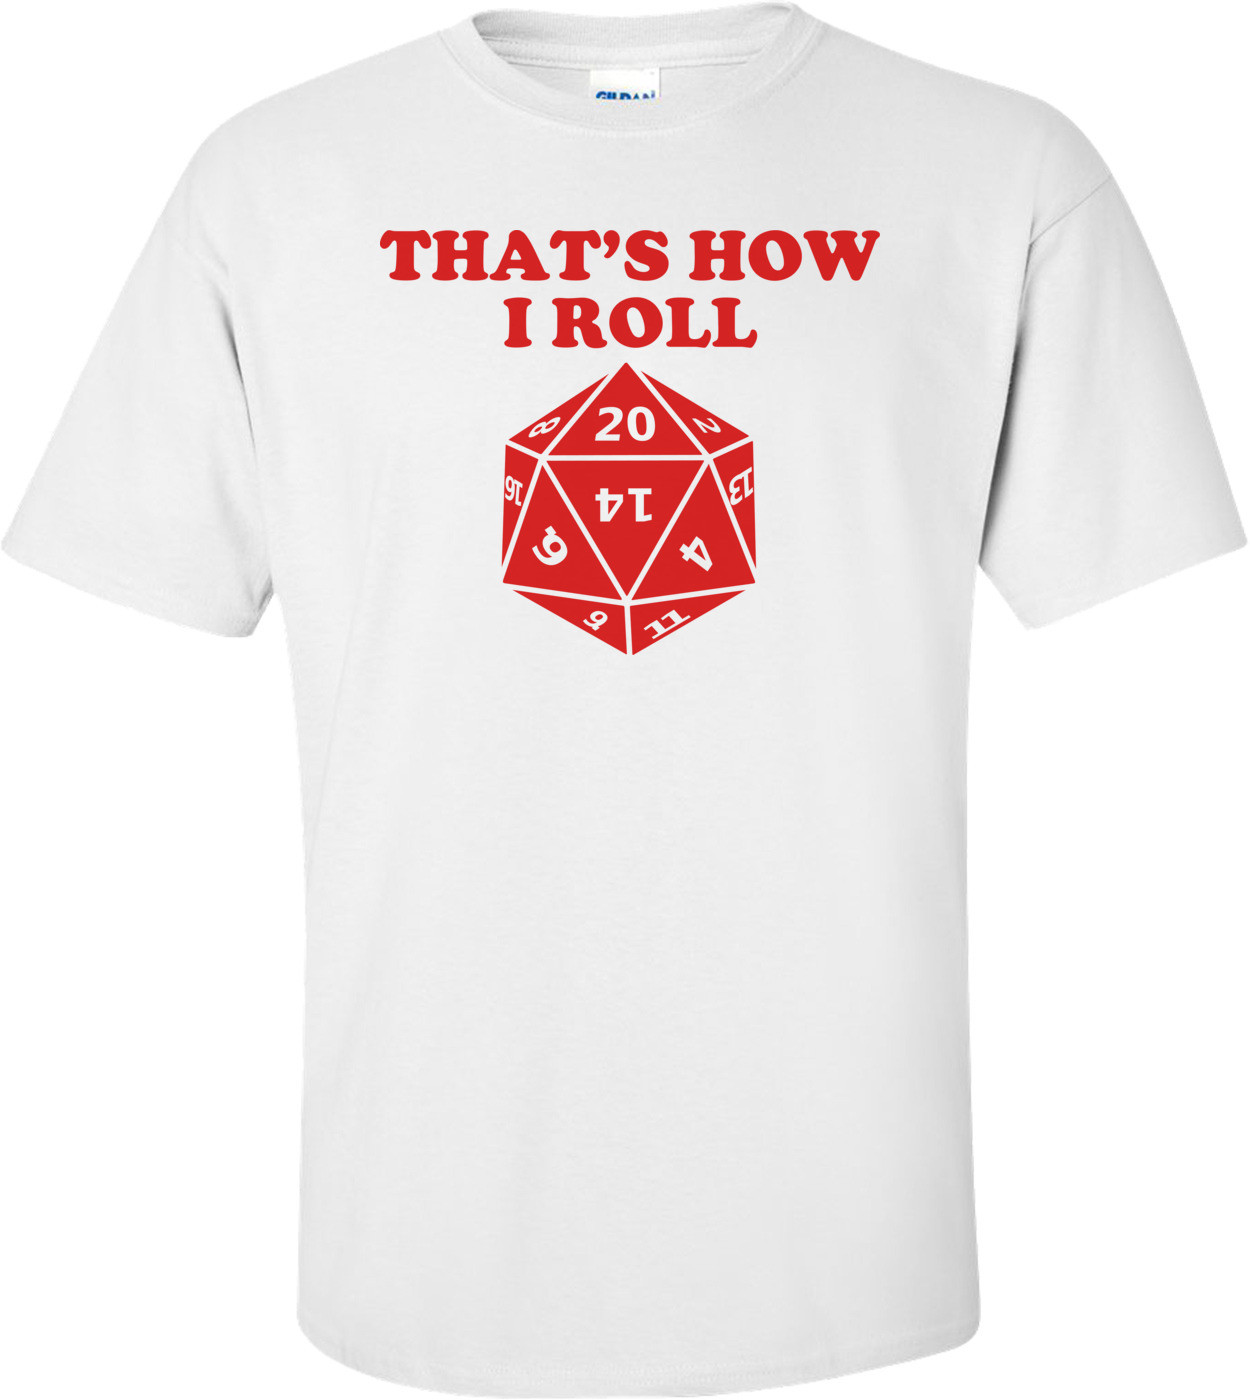 That's How I Roll - Icosahedron Shirt